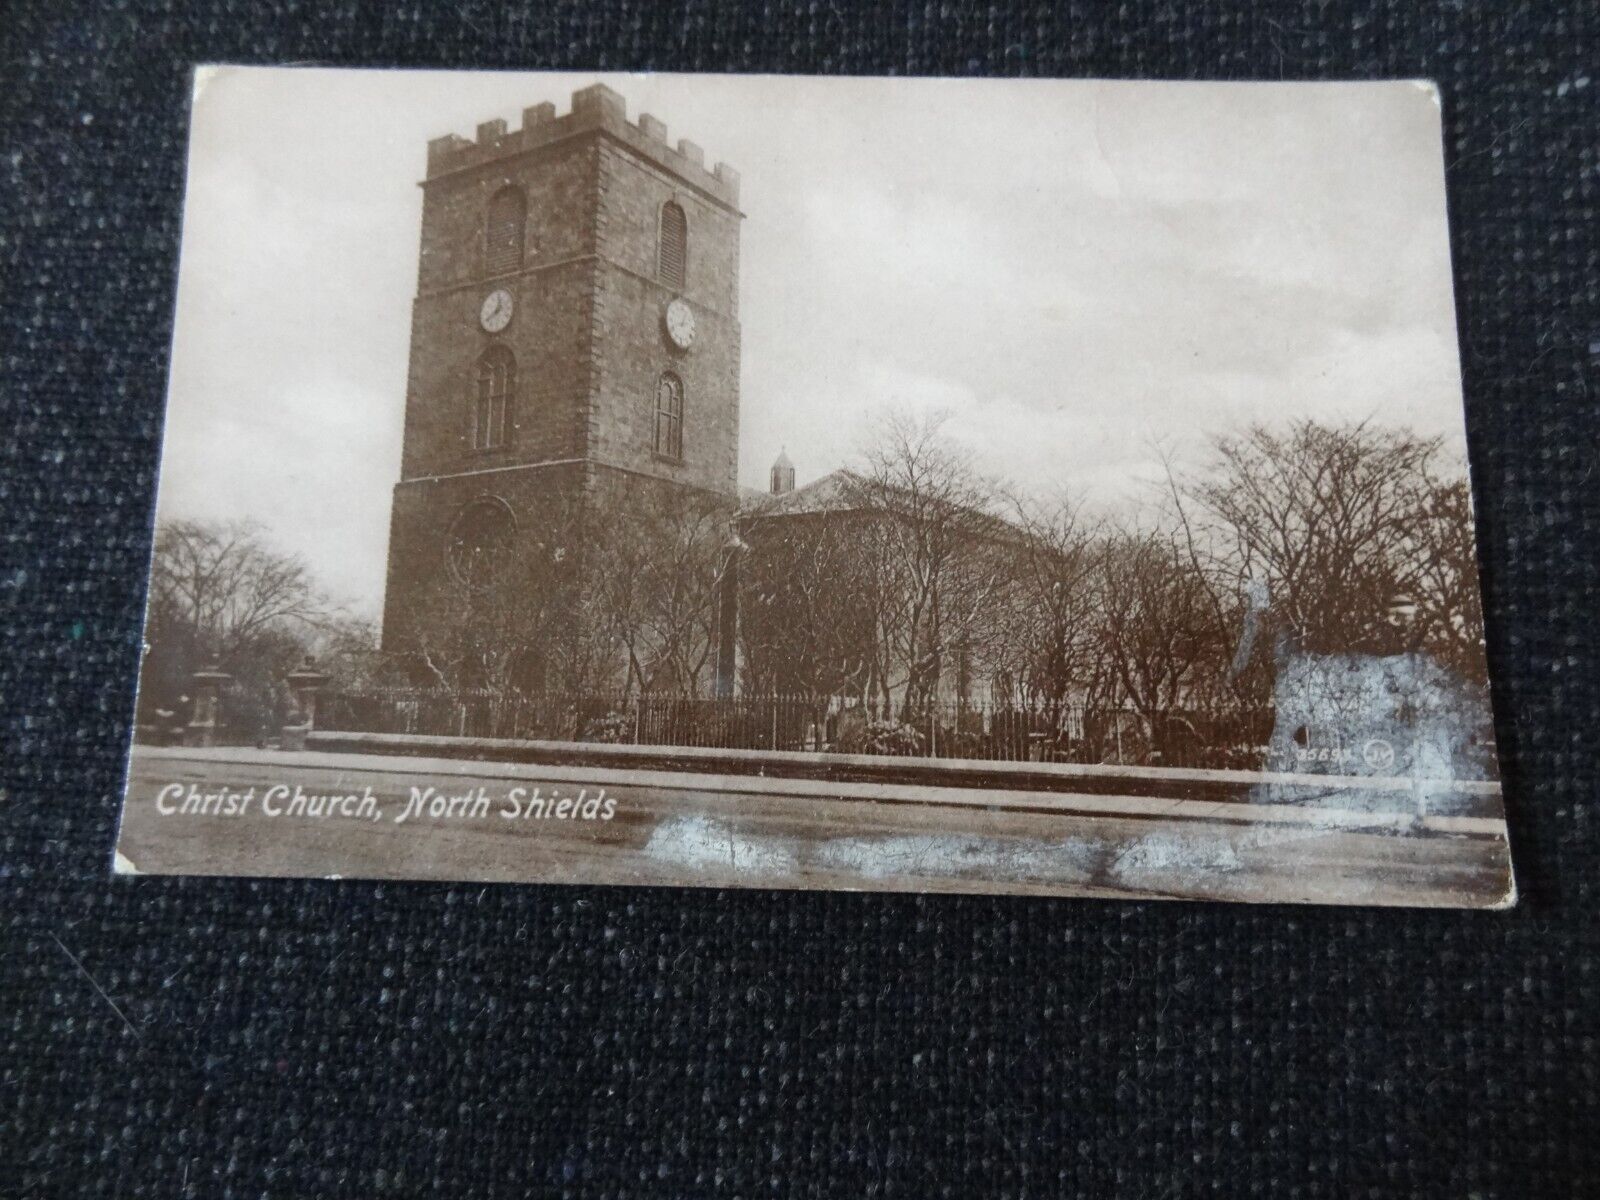 House Clearance - christ church north shields service - 62085